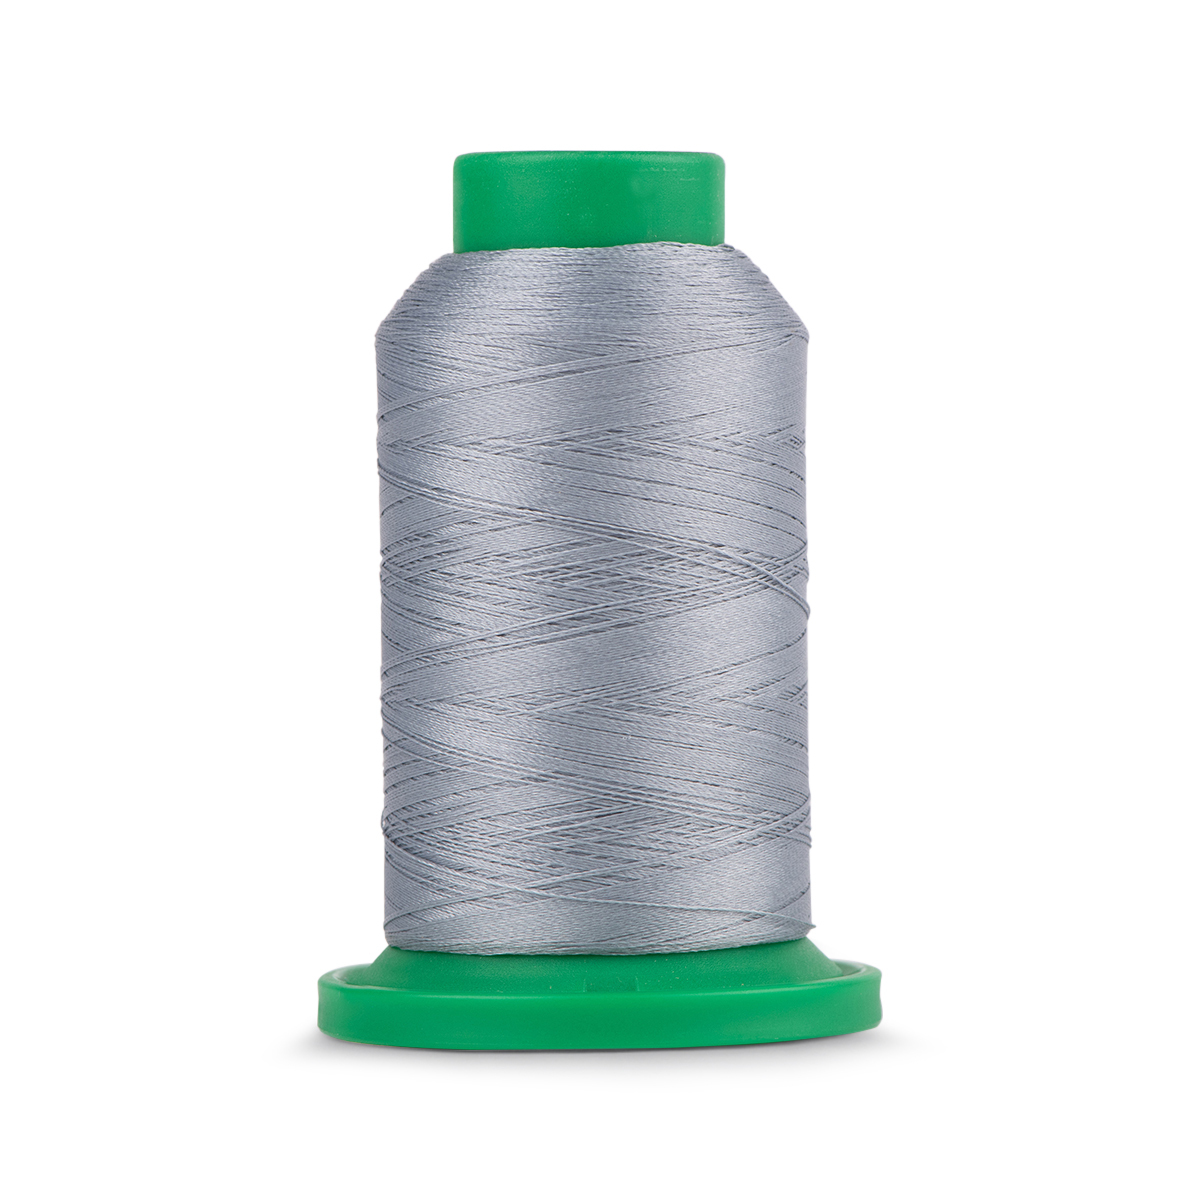 0310 - YELLOW - ISACORD EMBROIDERY THREAD 40 WT – Embroidery Supply Shop